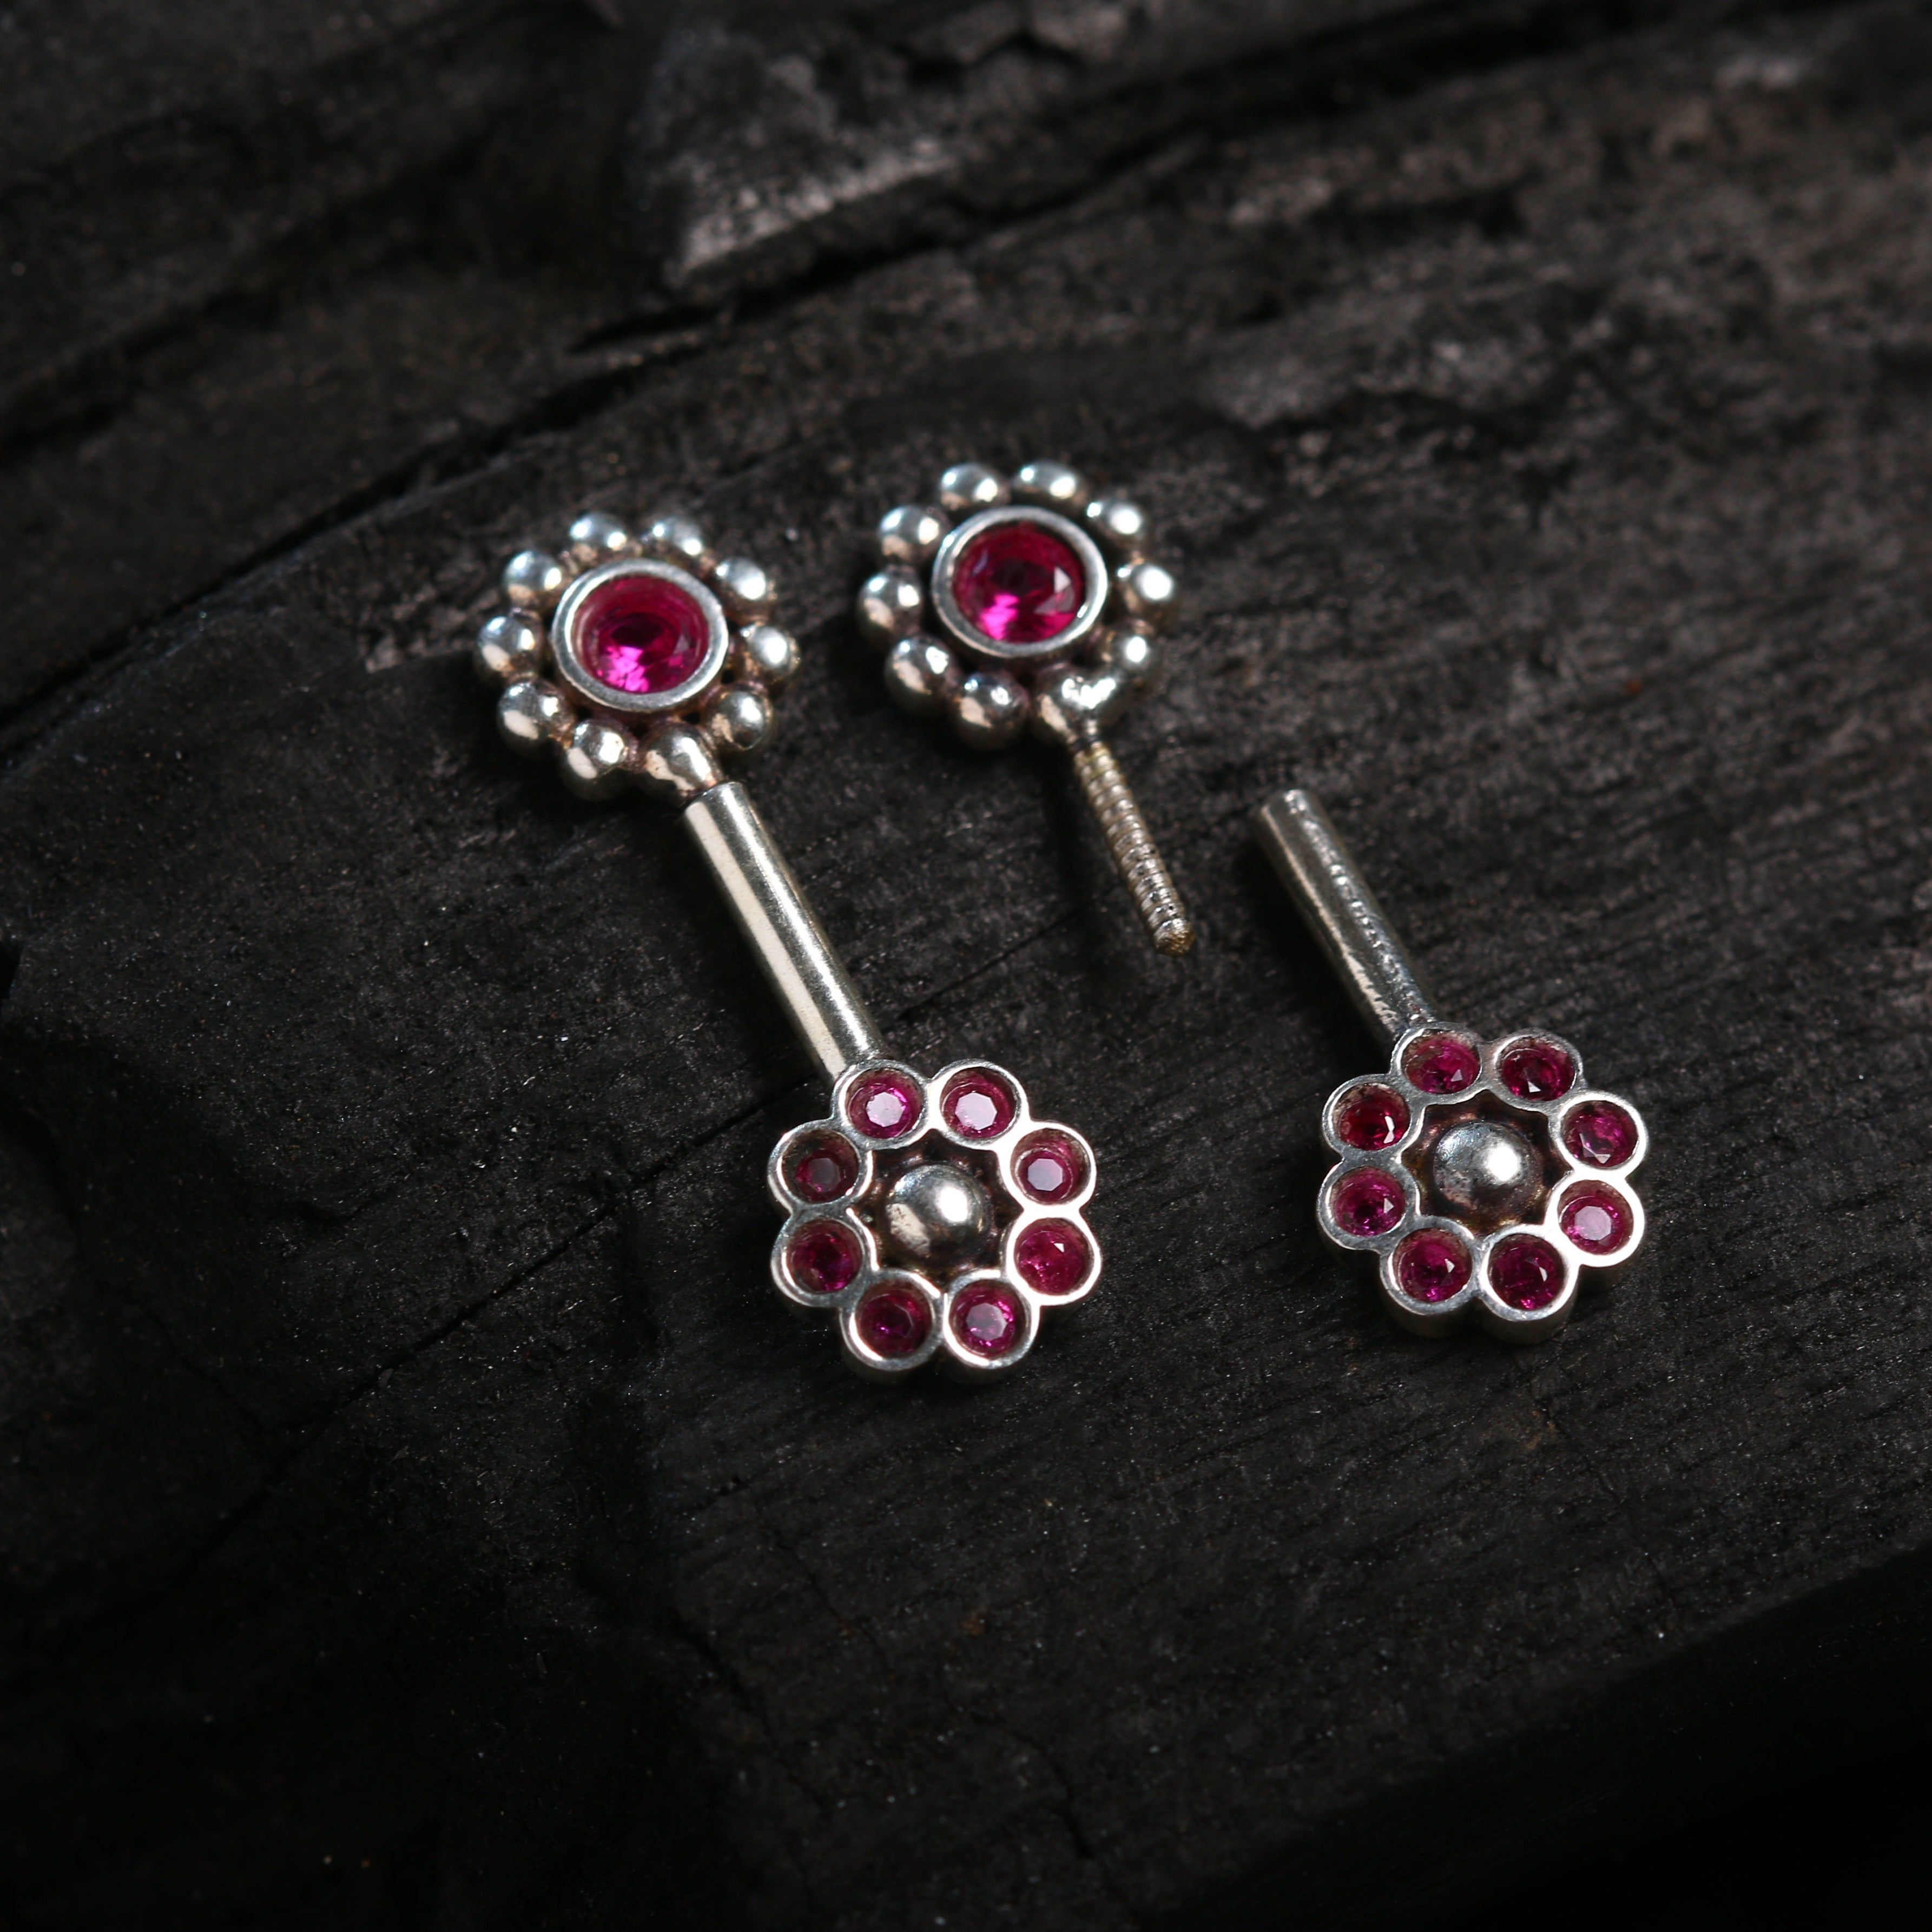 a pair of silver and pink jeweled earrings